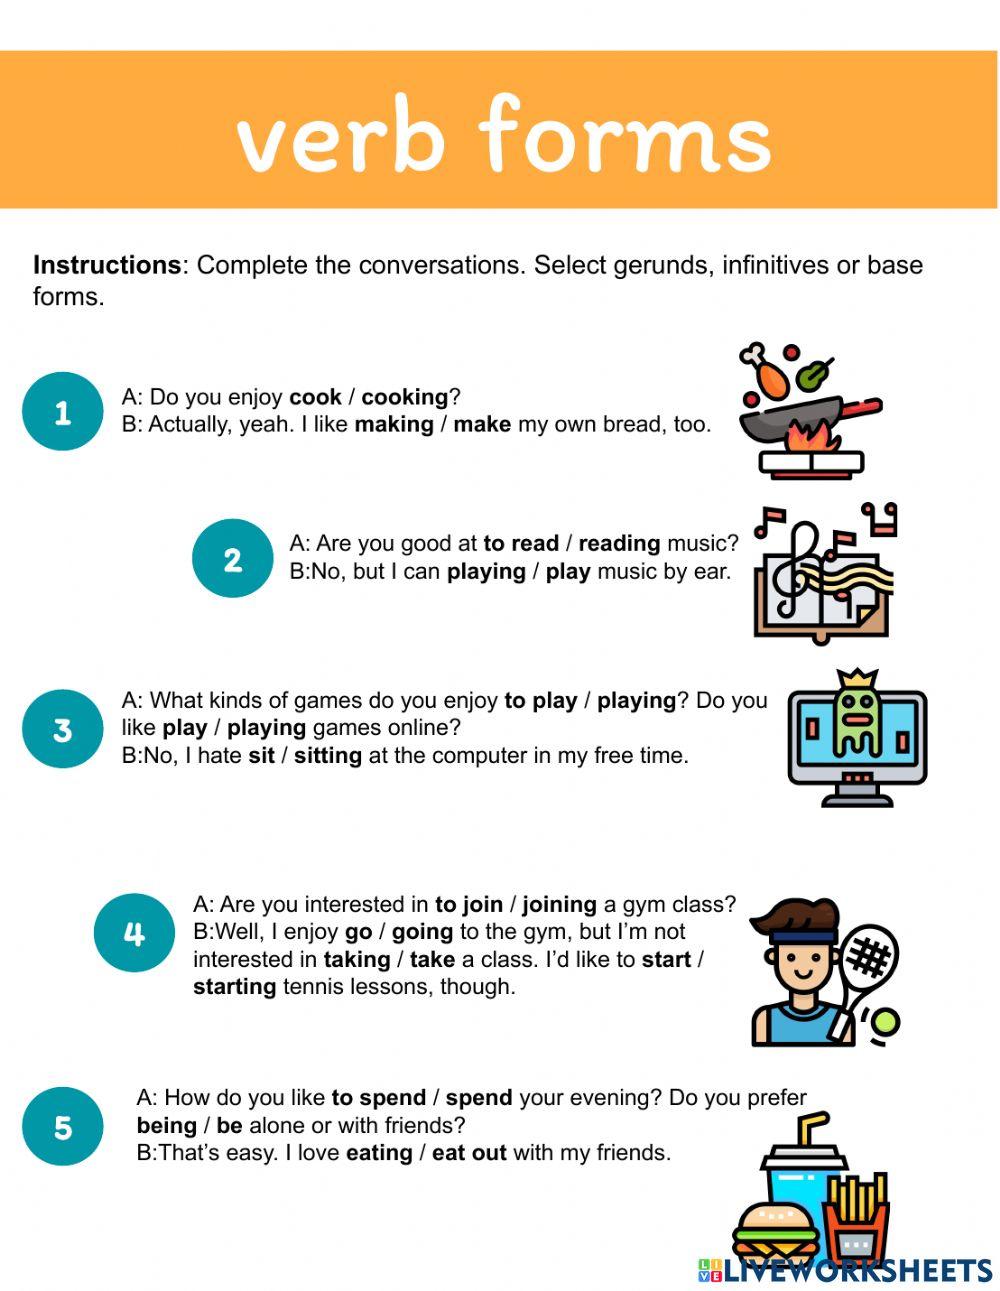 Verb forms A2